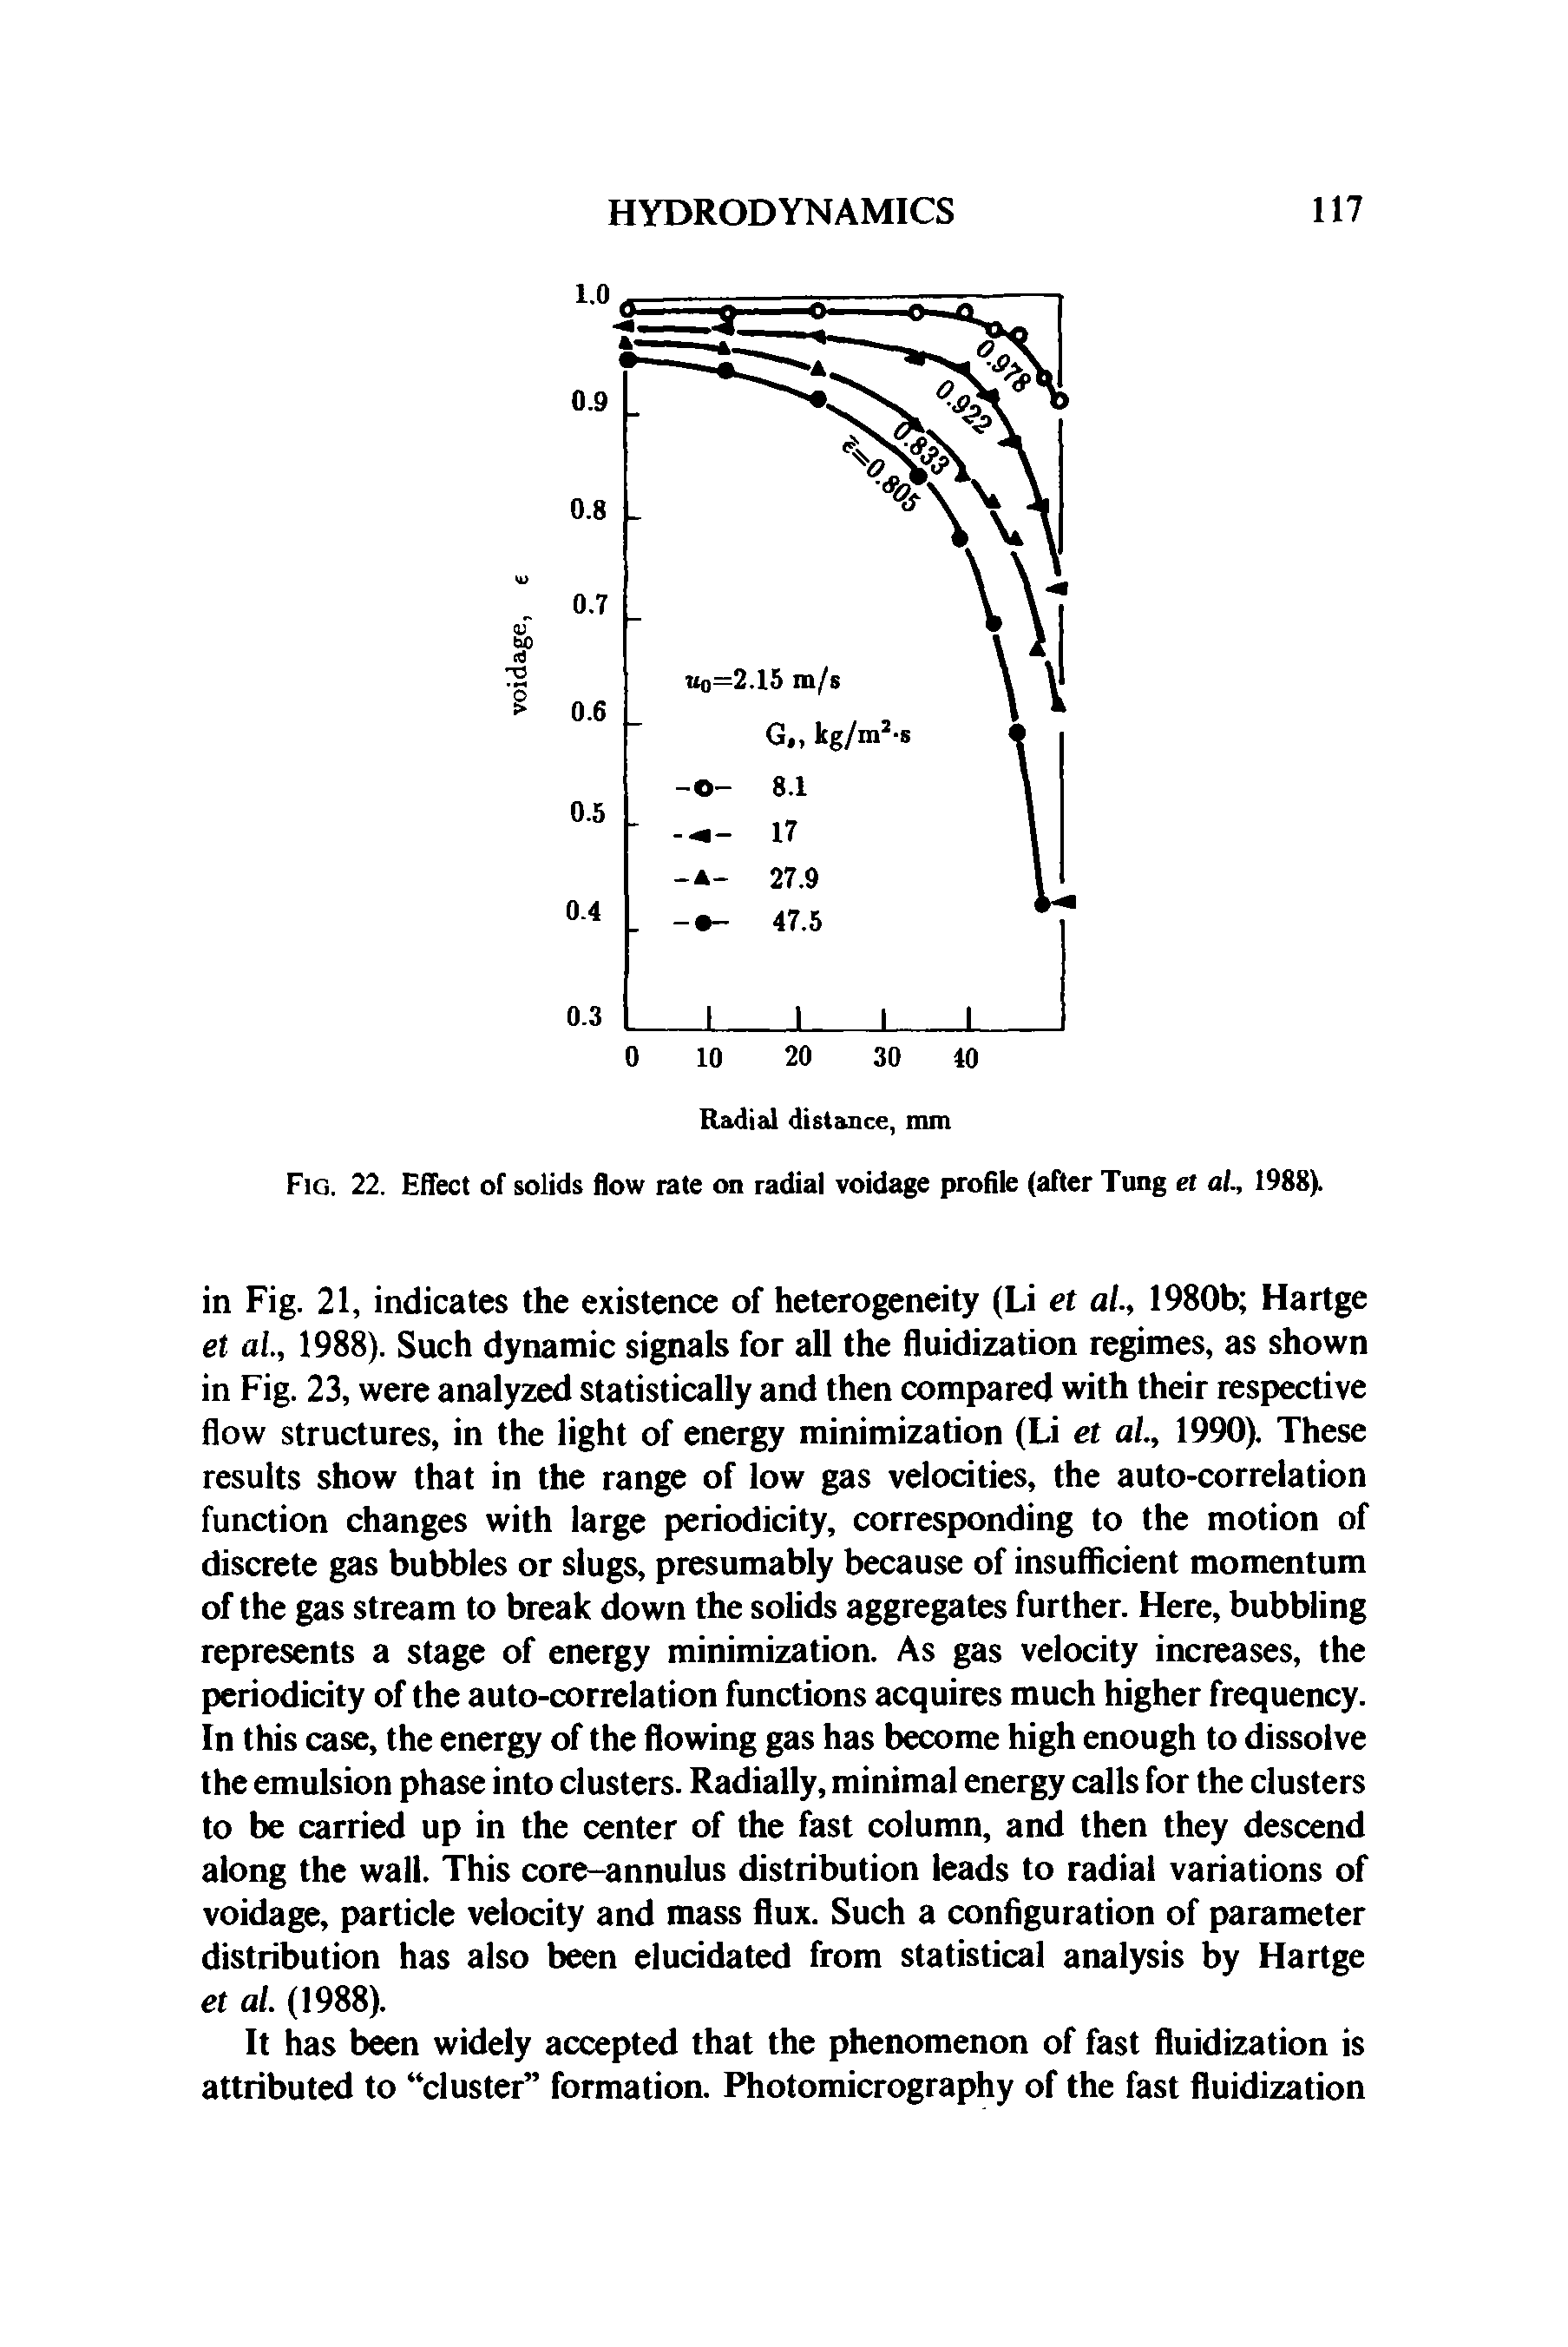 Fig. 22. Effect of solids flow rate on radial voidage profile (after Tung et a/., 1988).